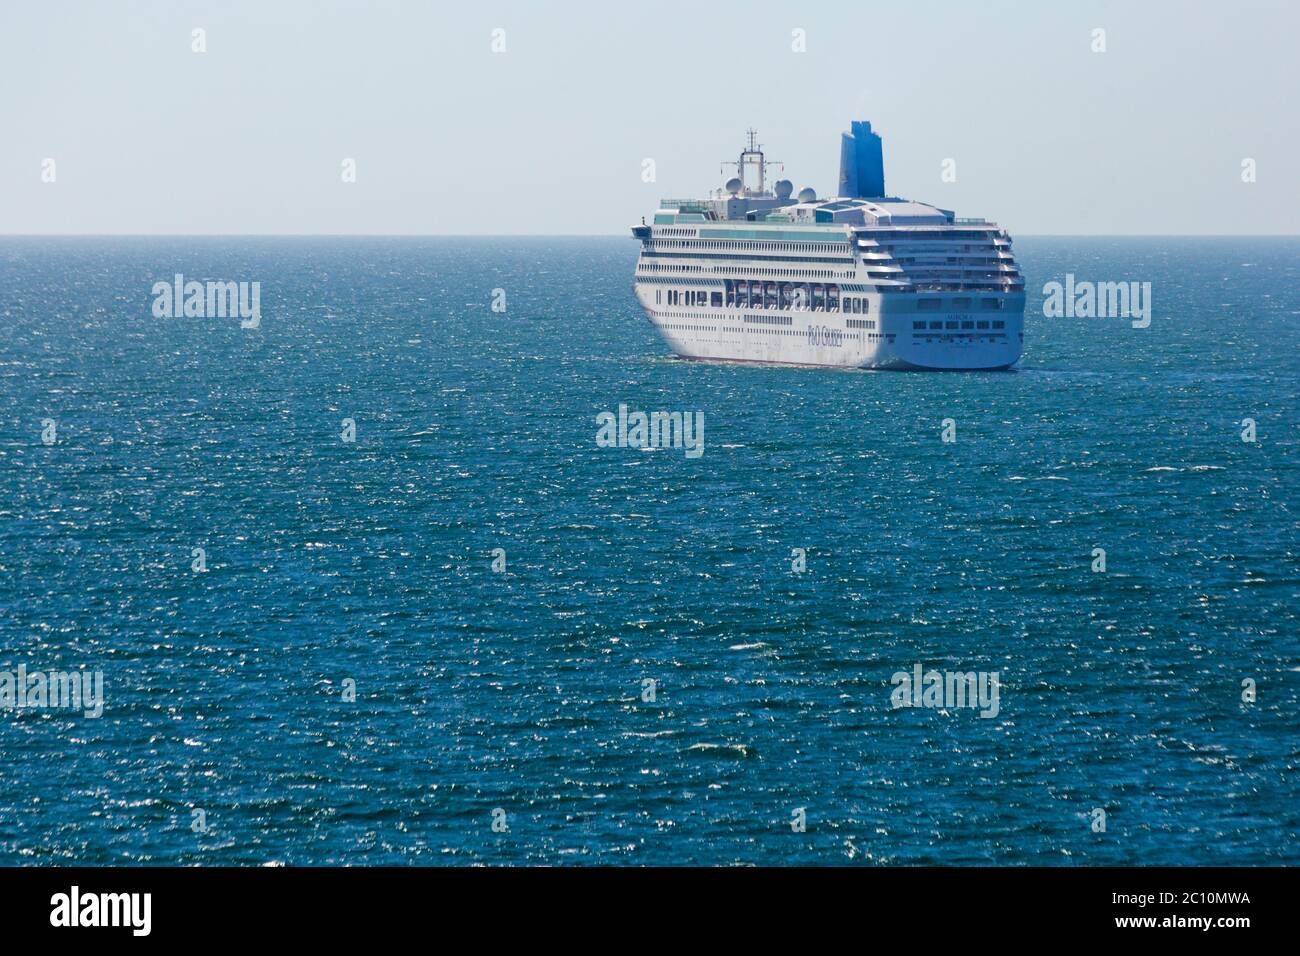 Bournemouth, Dorset UK. 13th June 2020. P&O cruise ship Arcadia joins Aurora moored at Poole Bay, Bournemouth as not enough room at Southampton; they are not cruising due to Coronavirus pandemic closing down the cruising industry forcing the companies to lay up their ships. Viewed from the beach. Credit: Carolyn Jenkins/Alamy Live News Stock Photo